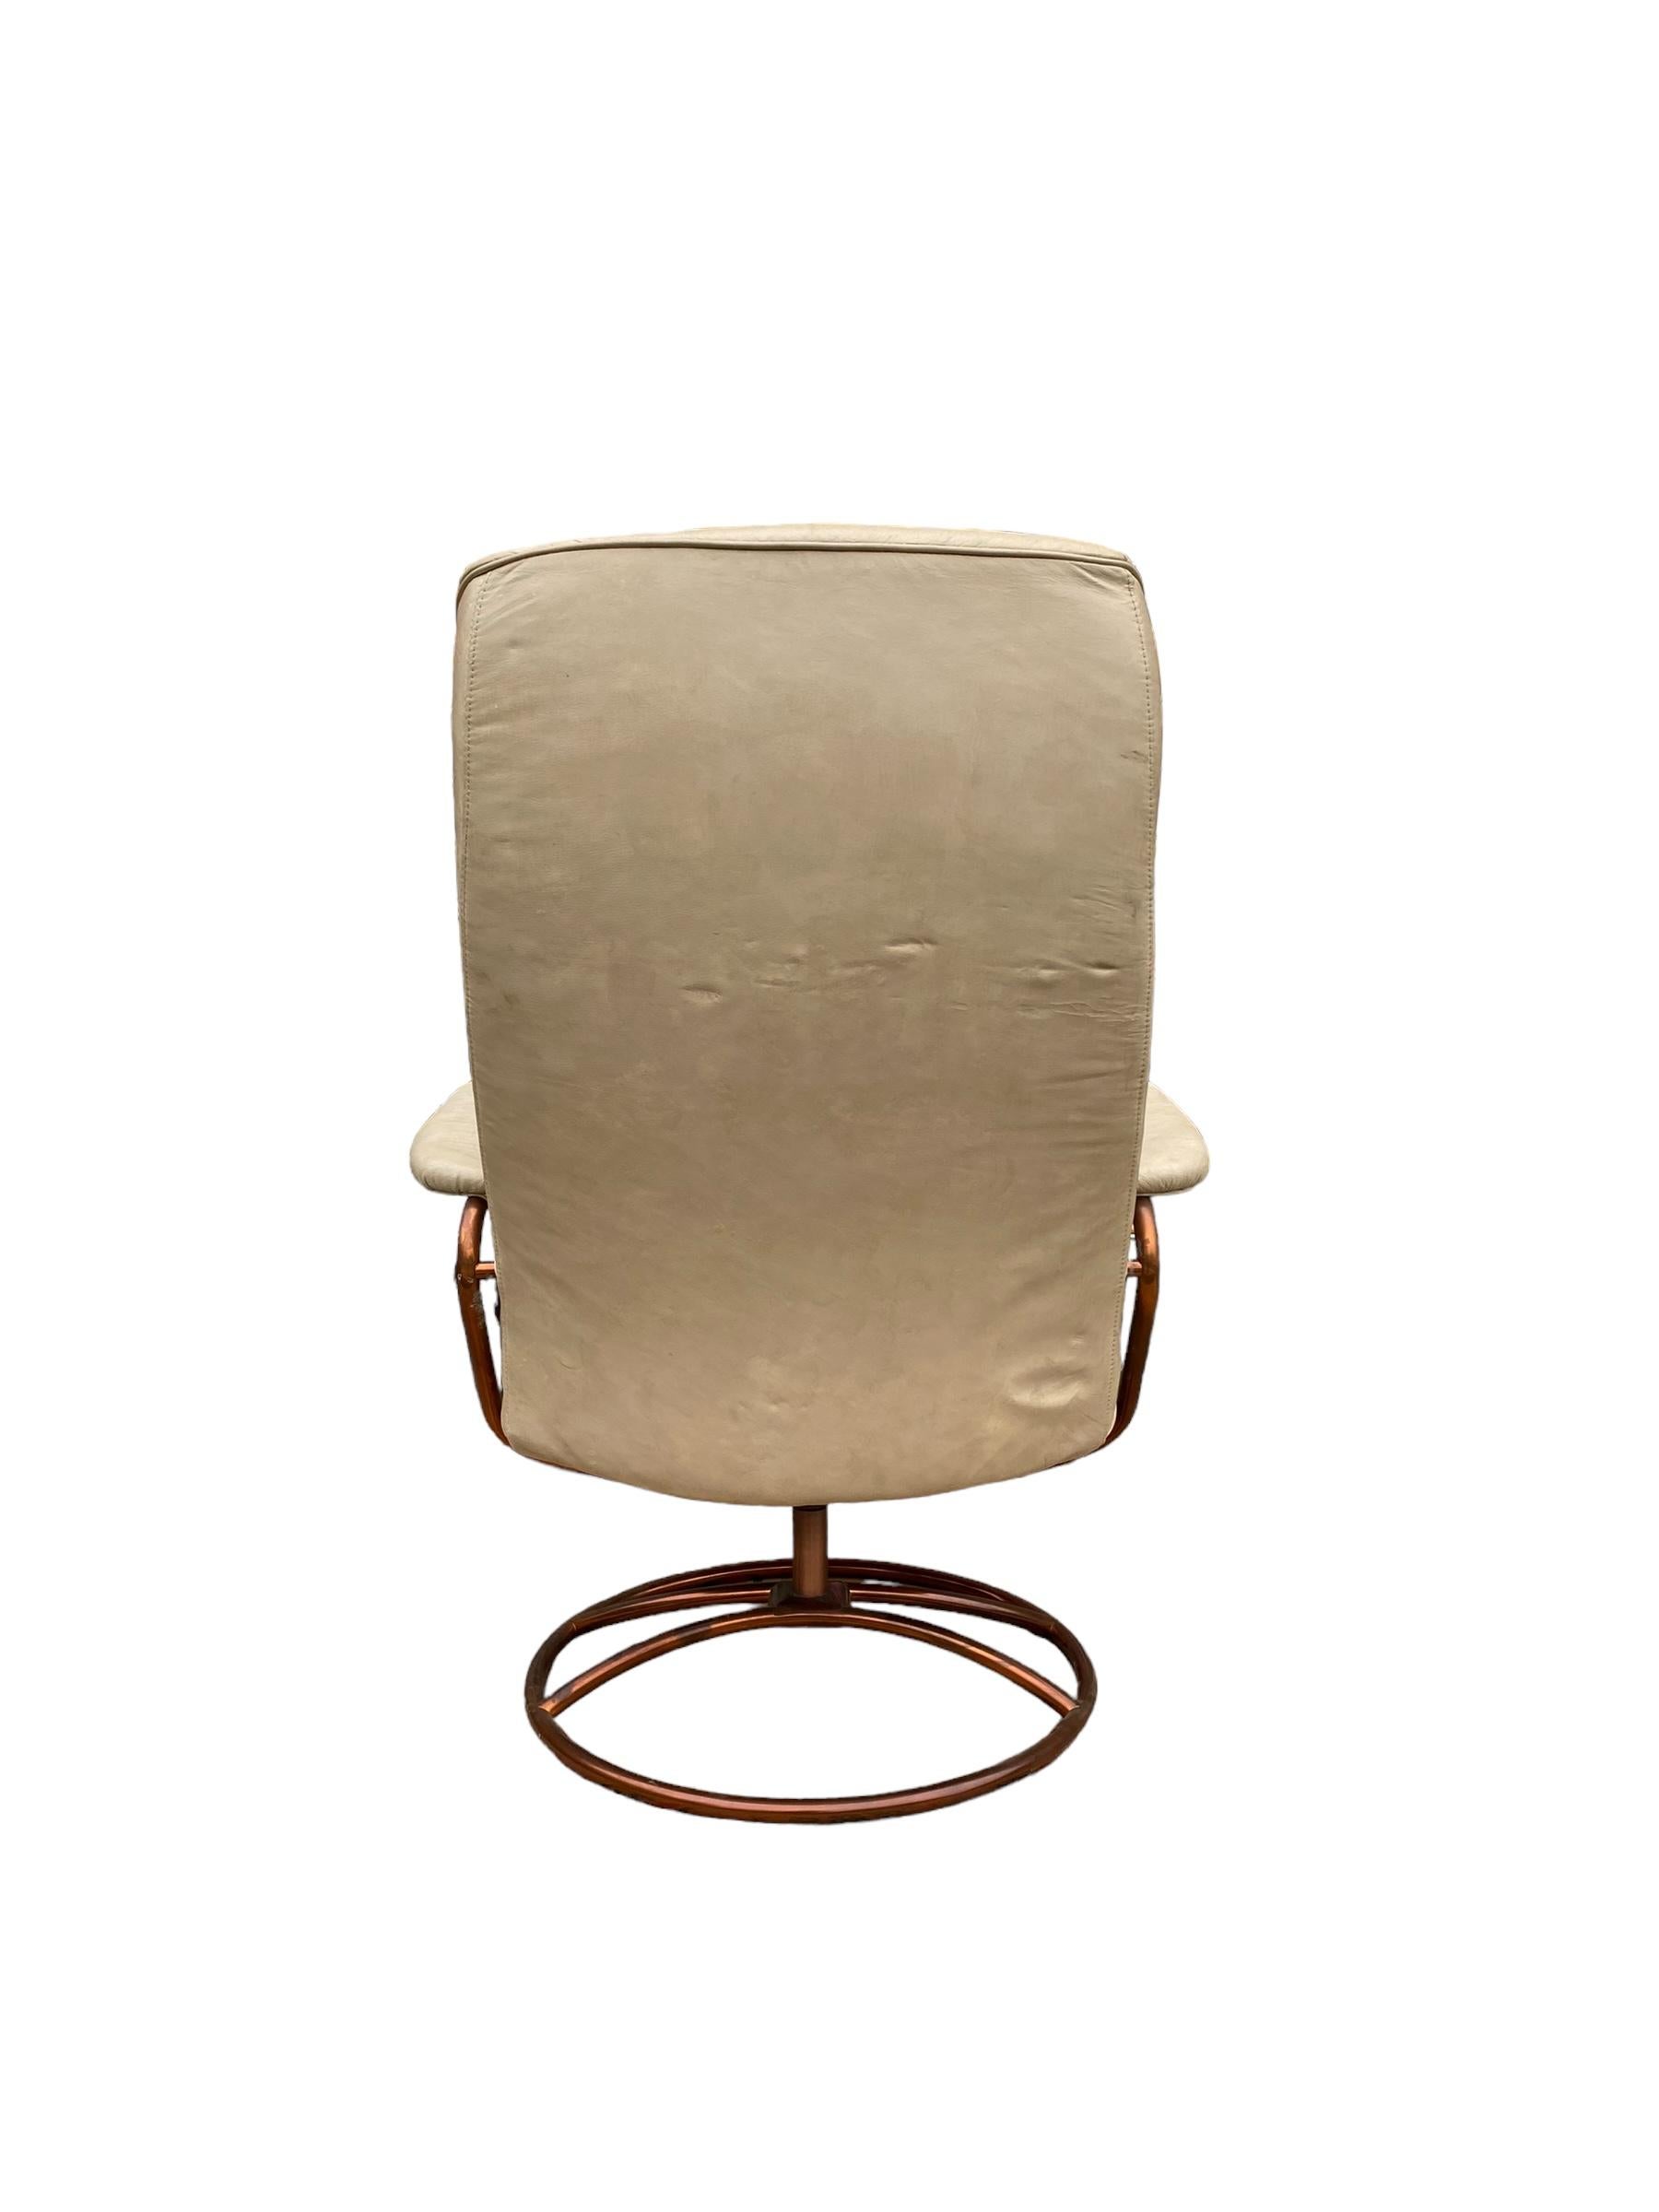 20th Century Post Modern Stressless Lounge Chair and Ottoman with copper frame For Sale